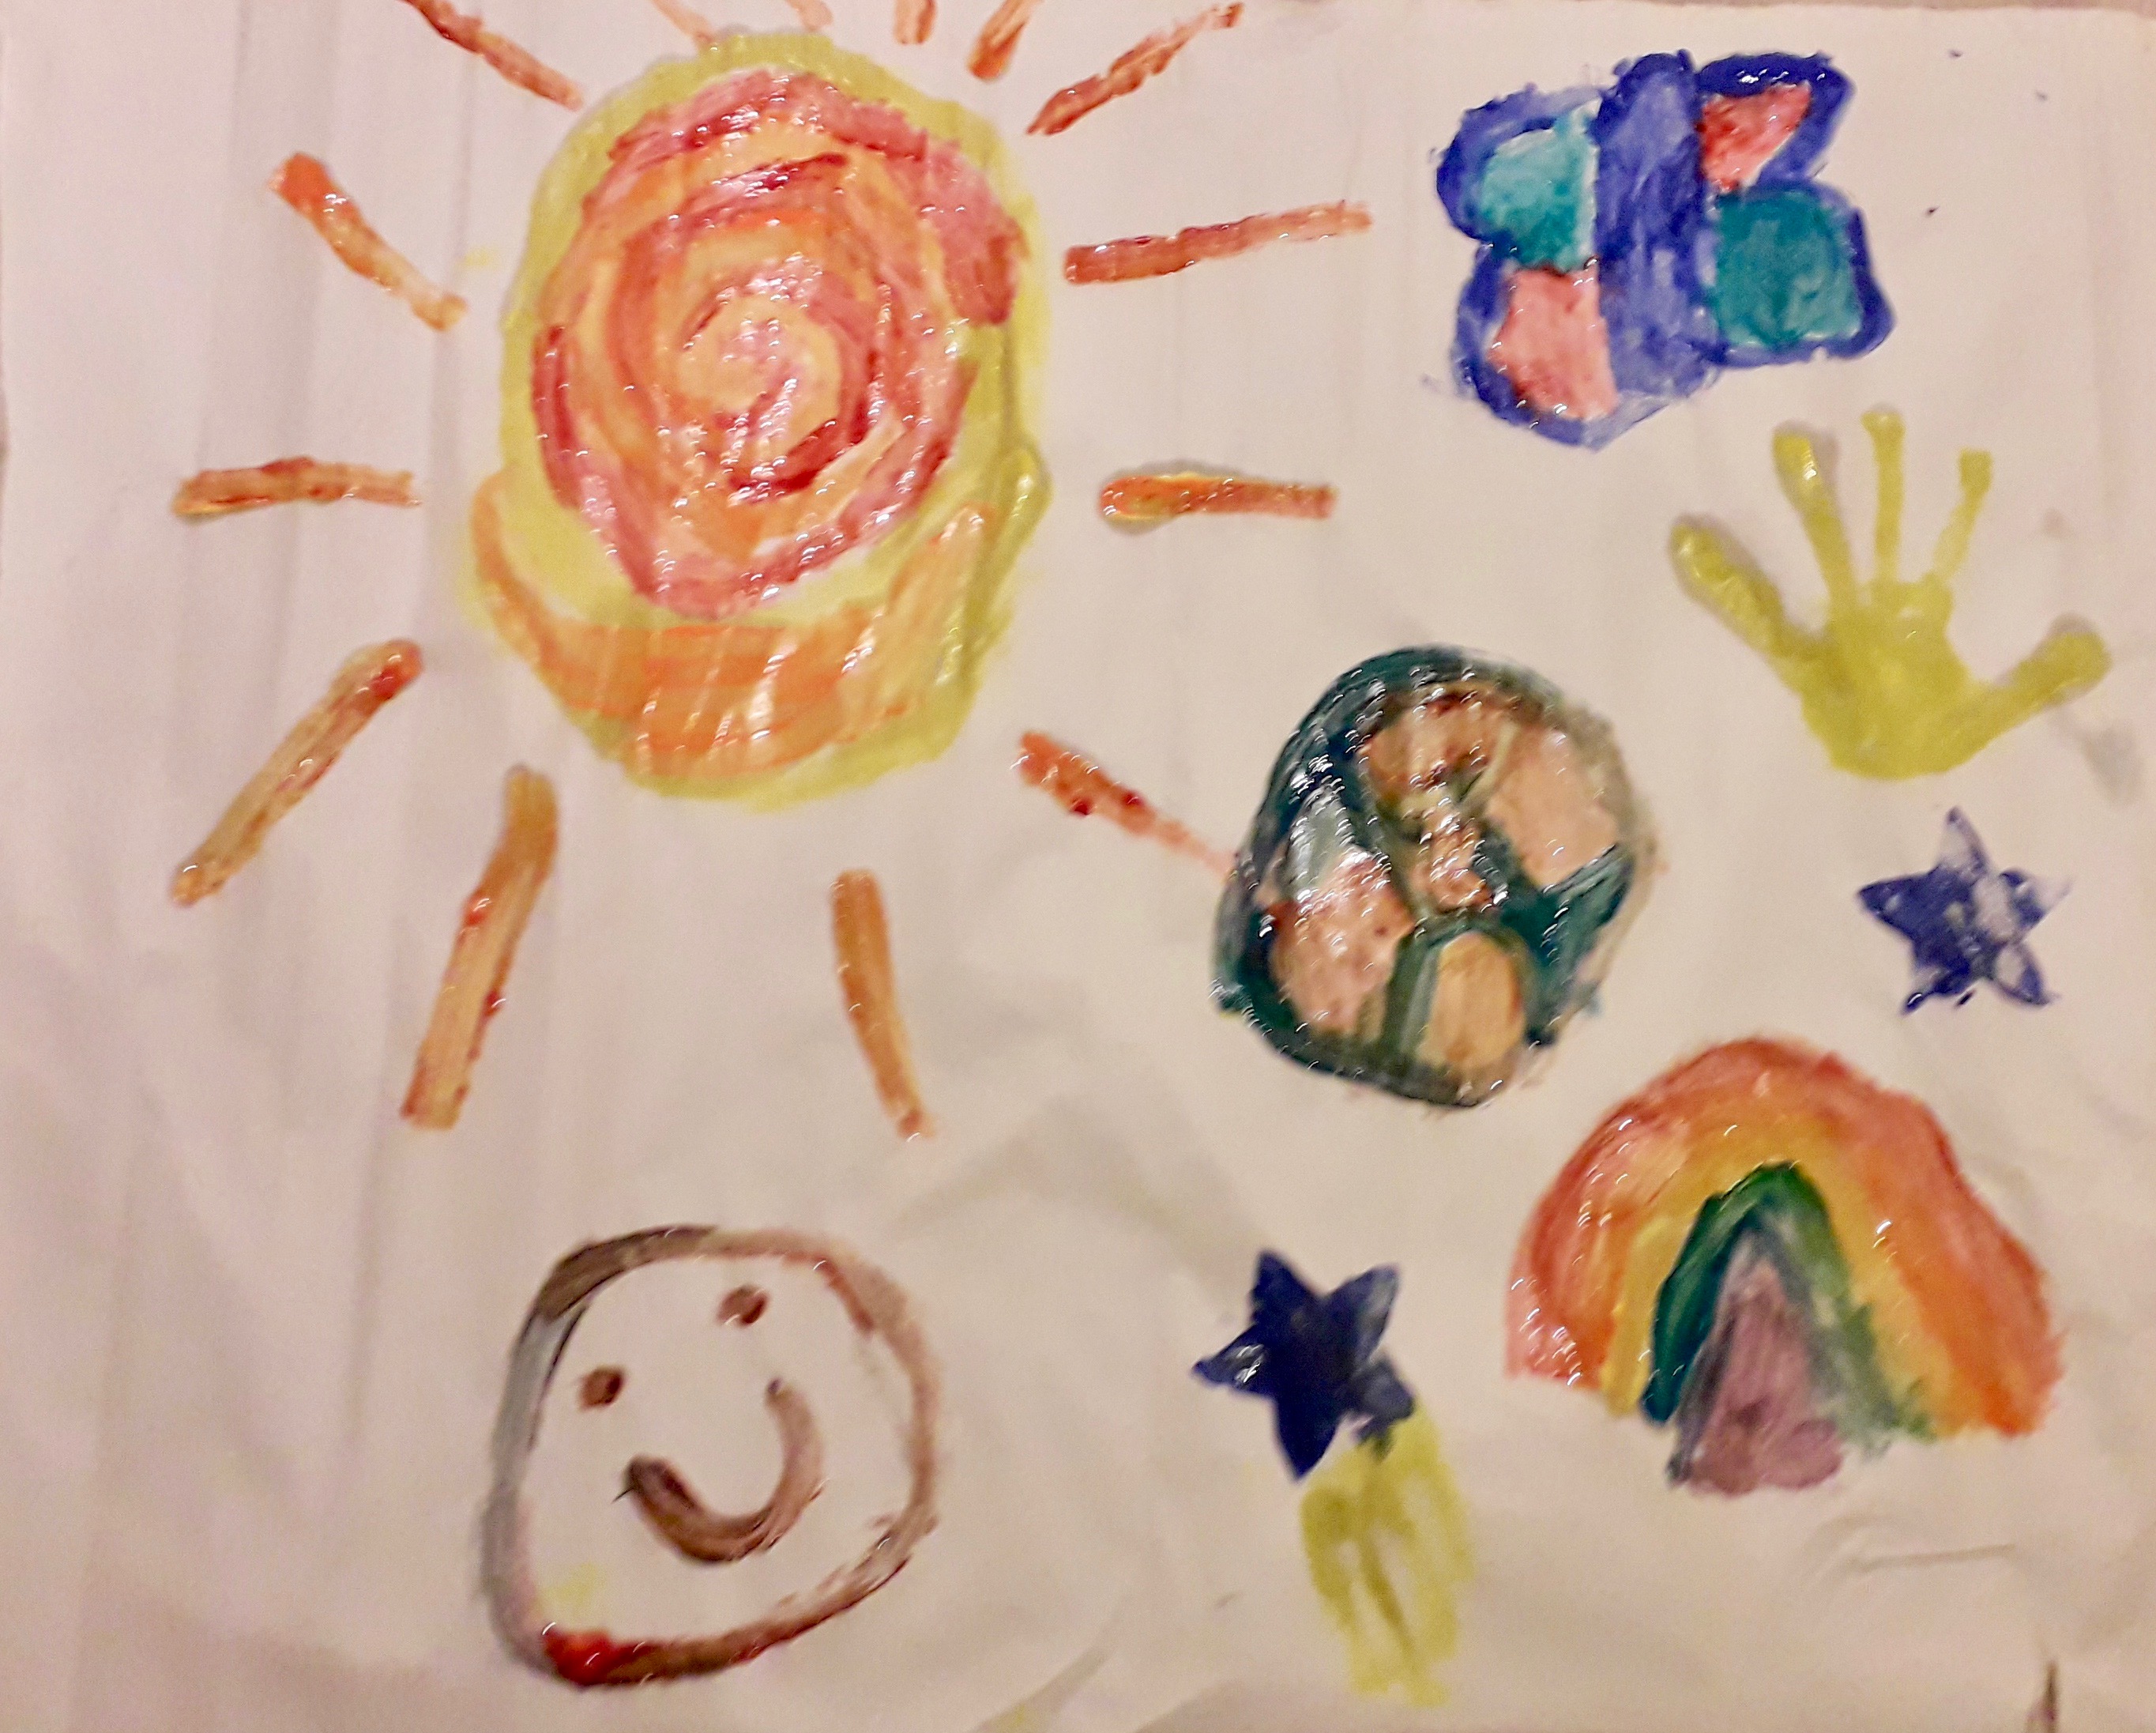 'My colourful world' by Isabel (6) from Westmeath